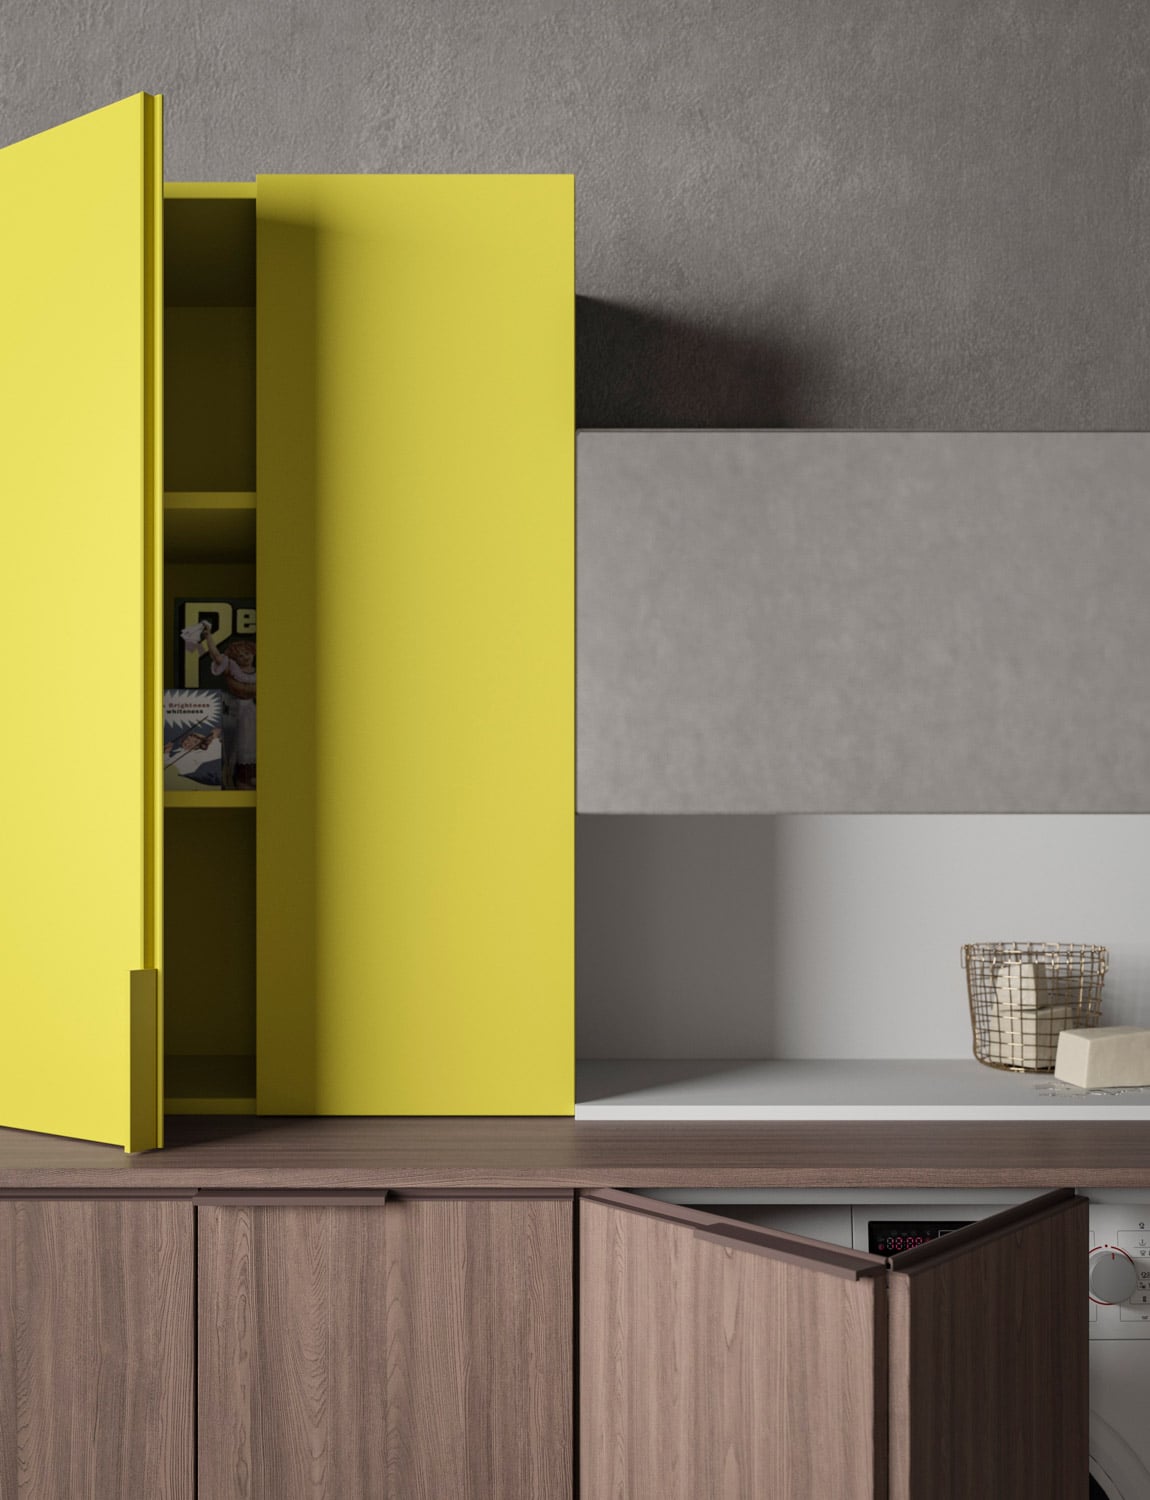 The handles in lacquered metal are made to match the cabinets, for a minimalist look.